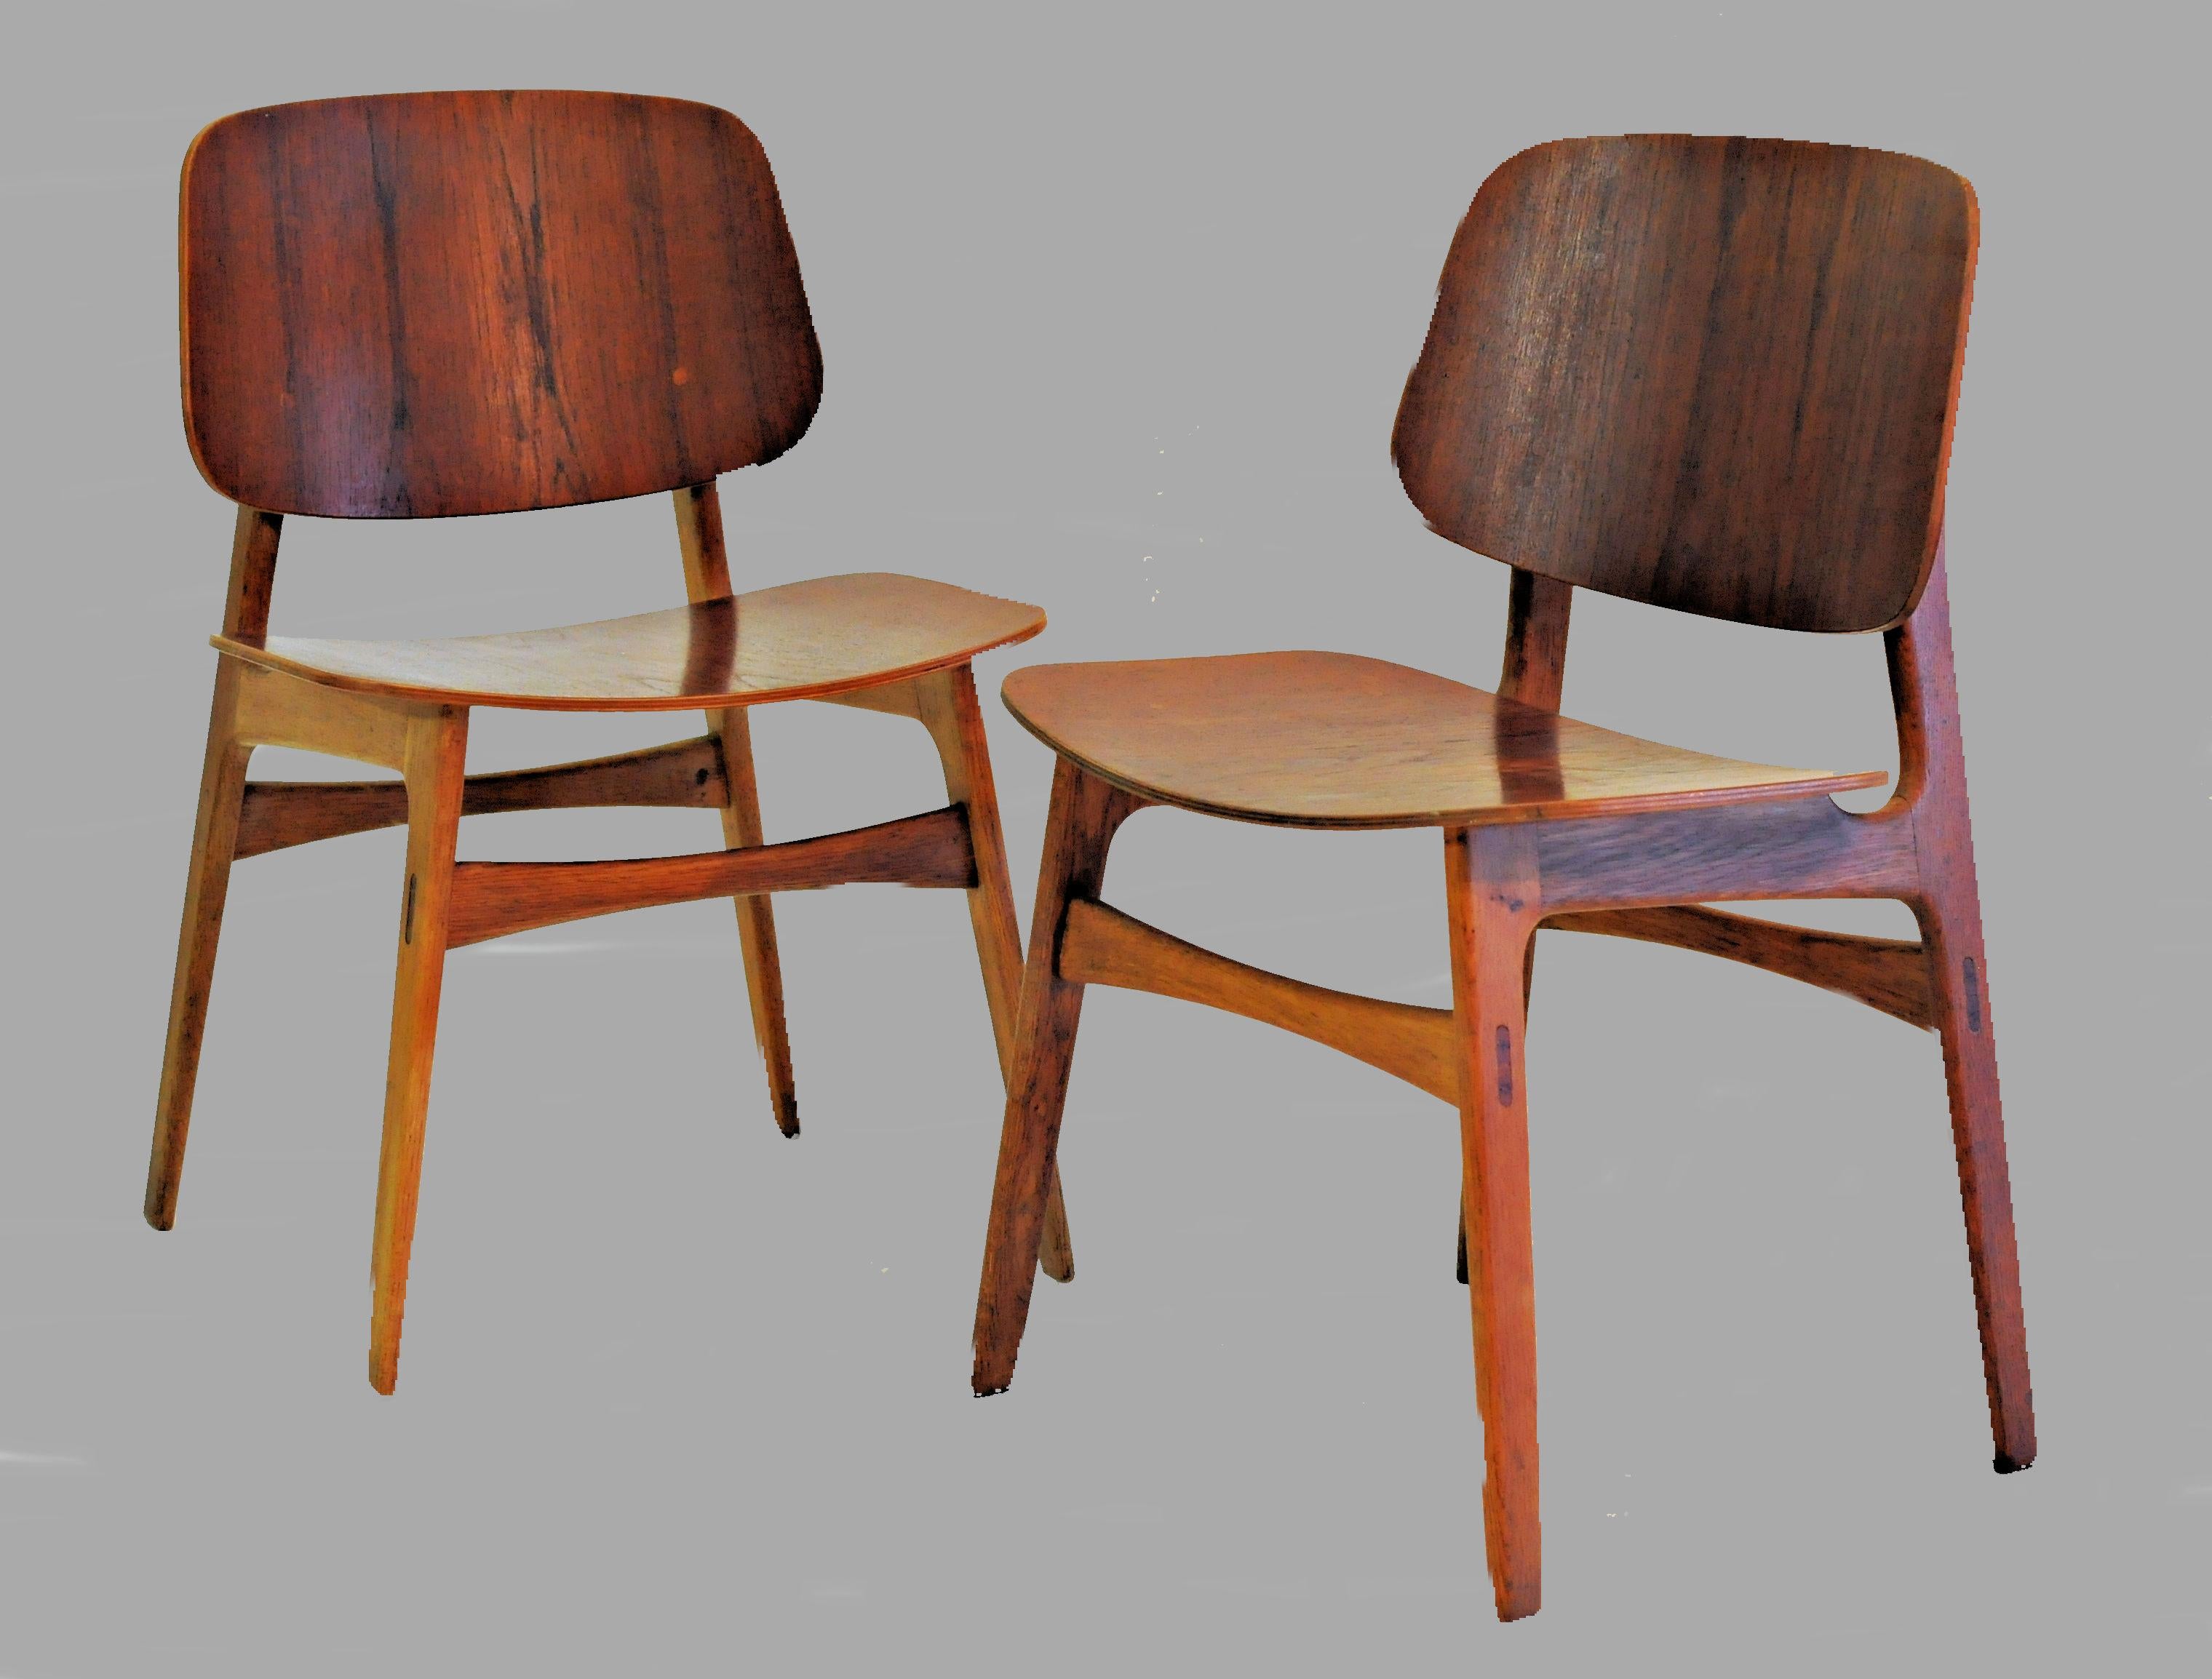 Set of two shell chairs designed in 1950 for Søborg Møbelfabrik. 

The shell chair distinguishes itself by the use of a plywood molding technique. The chair consists of two wide and slightly curved teak shells, resting on an oak frame with angled